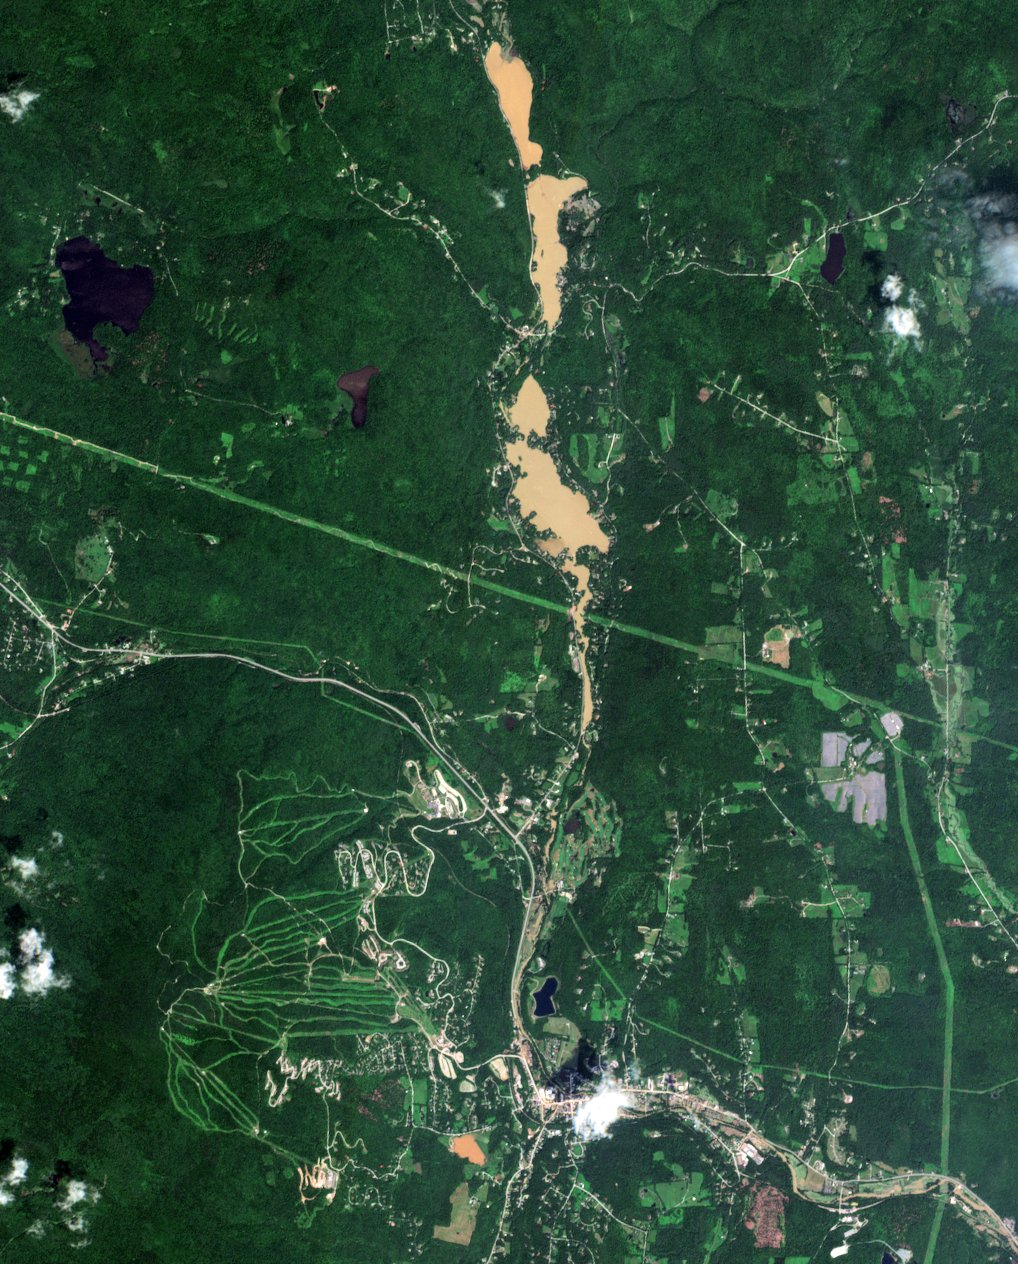 Satellite view of flooding in Vermont near Okemo, a ski area in the Green Mountains, on 11 July 2023. As much as 10" of rain may have fallen here. Satellite images showed that flooding had receded somewhat after 24 hours, but rivers and lakes remained muddy from landslides and other erosion. Photo: Evan Dethier